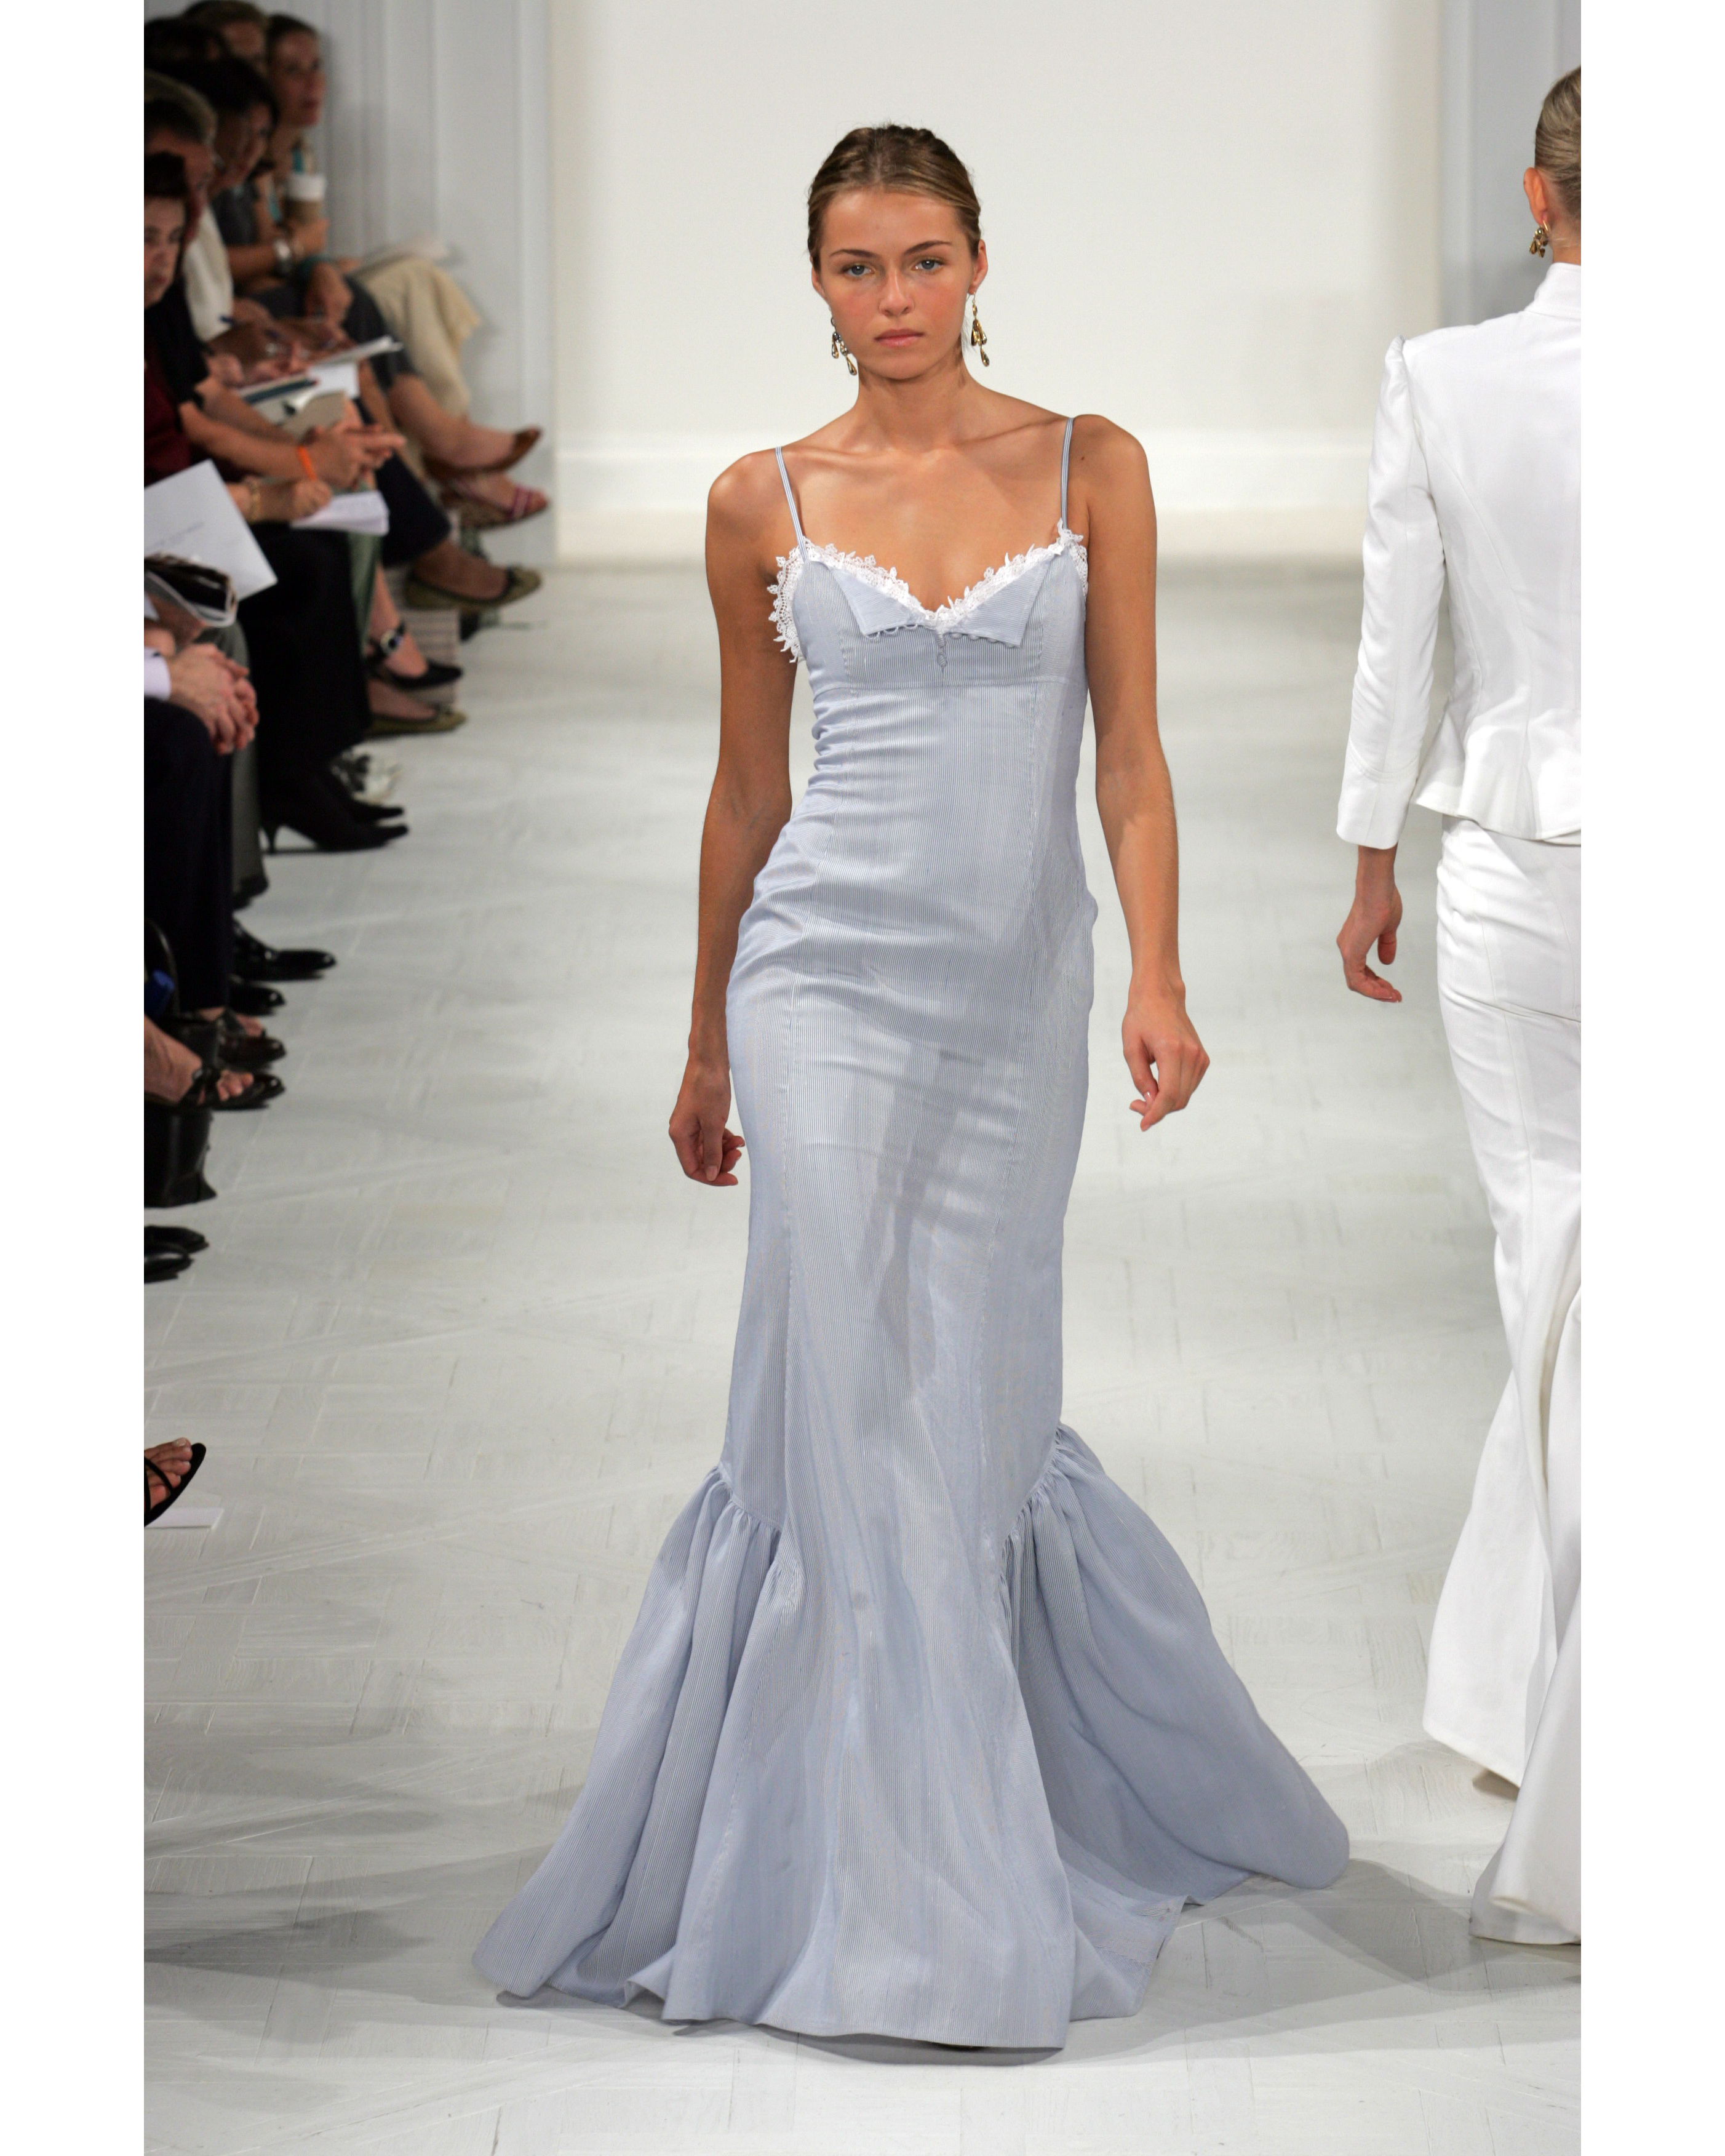 S/S 2006 Pinstriped Blue and White Lace Trim Gown